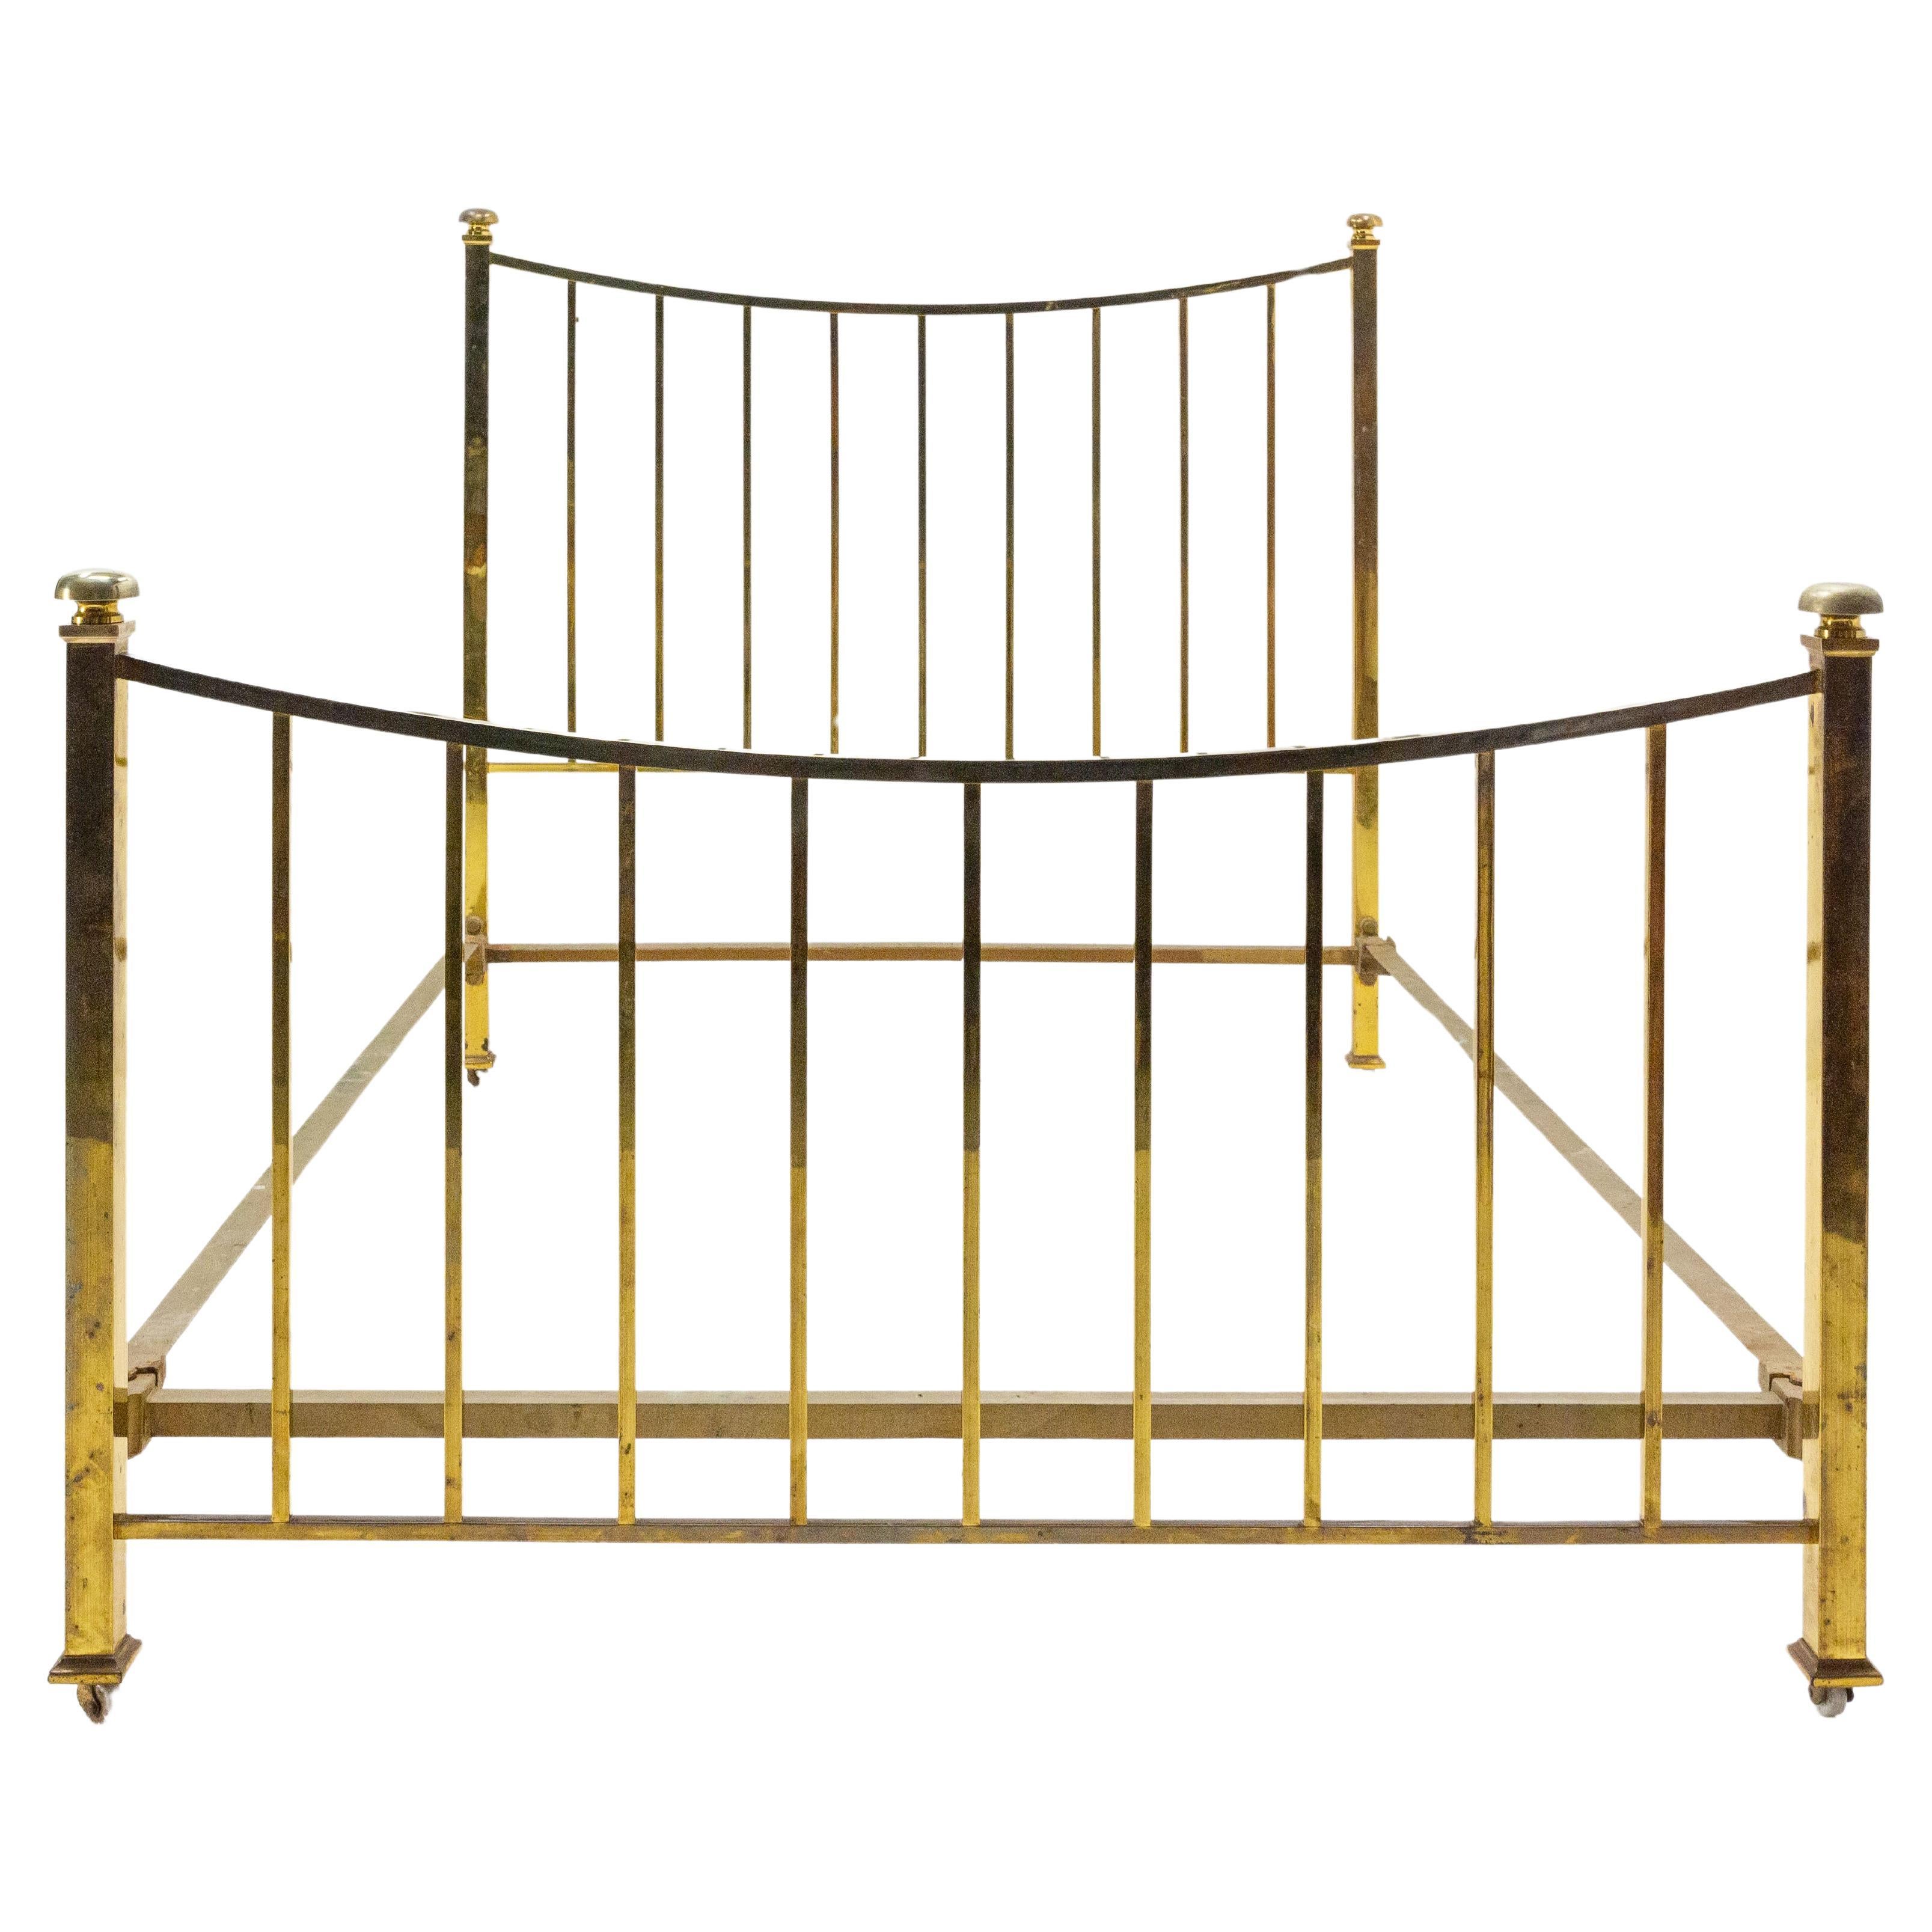 Art Deco Brass Bed US Double Bed UK Full Size French, c. 1930